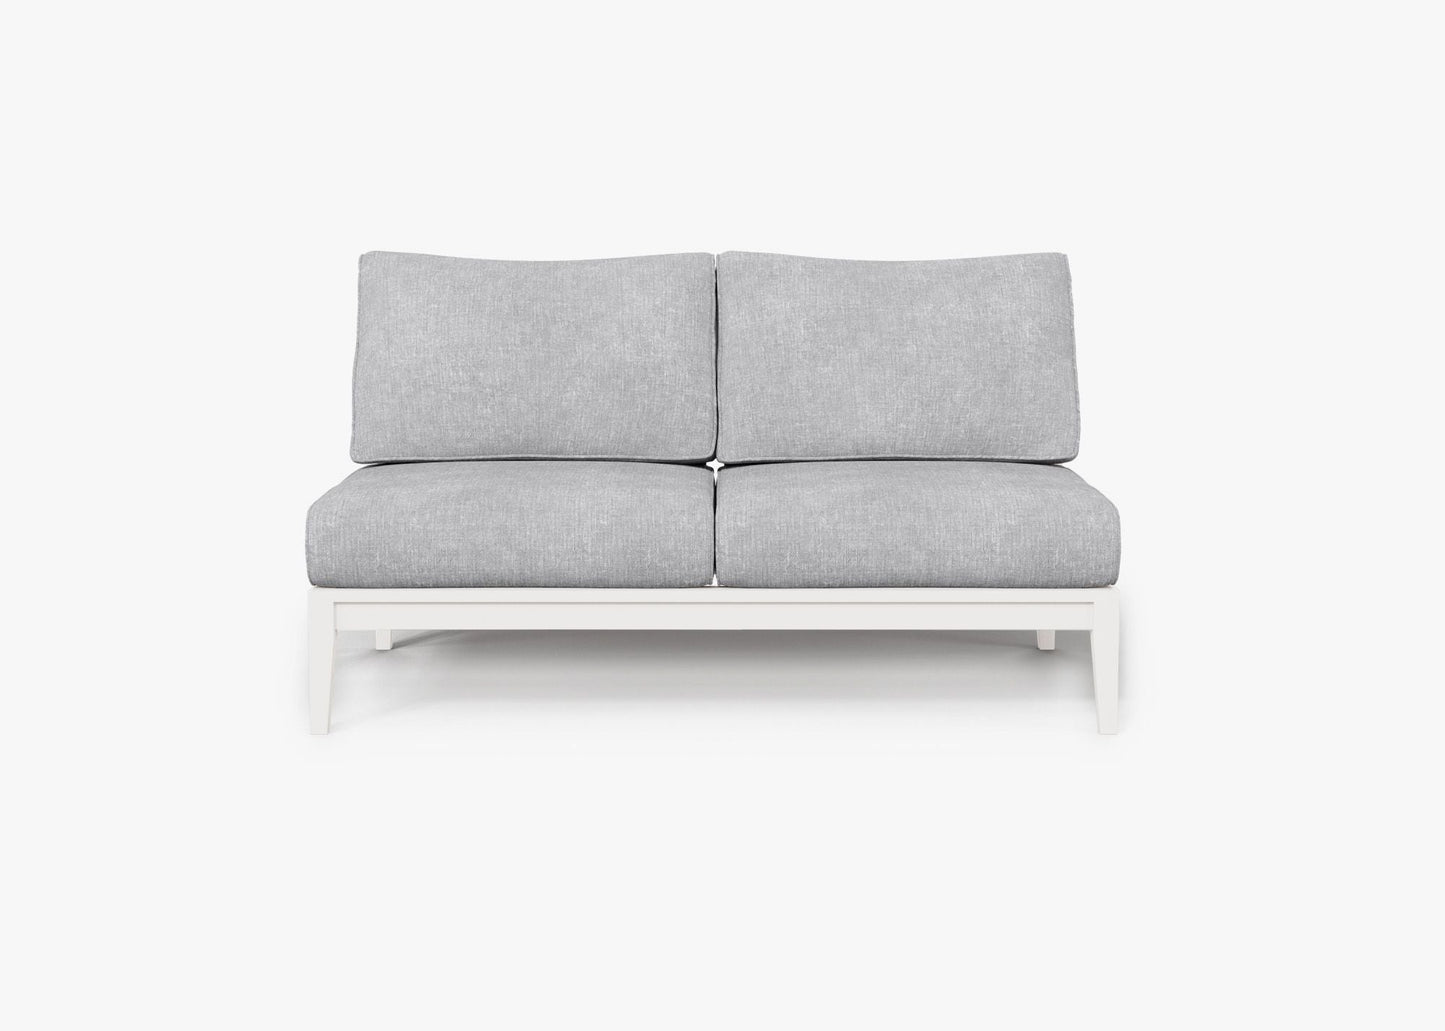 Live Outer 58" White Aluminum Outdoor Armless Loveseat With Pacific Fog Gray Cushion